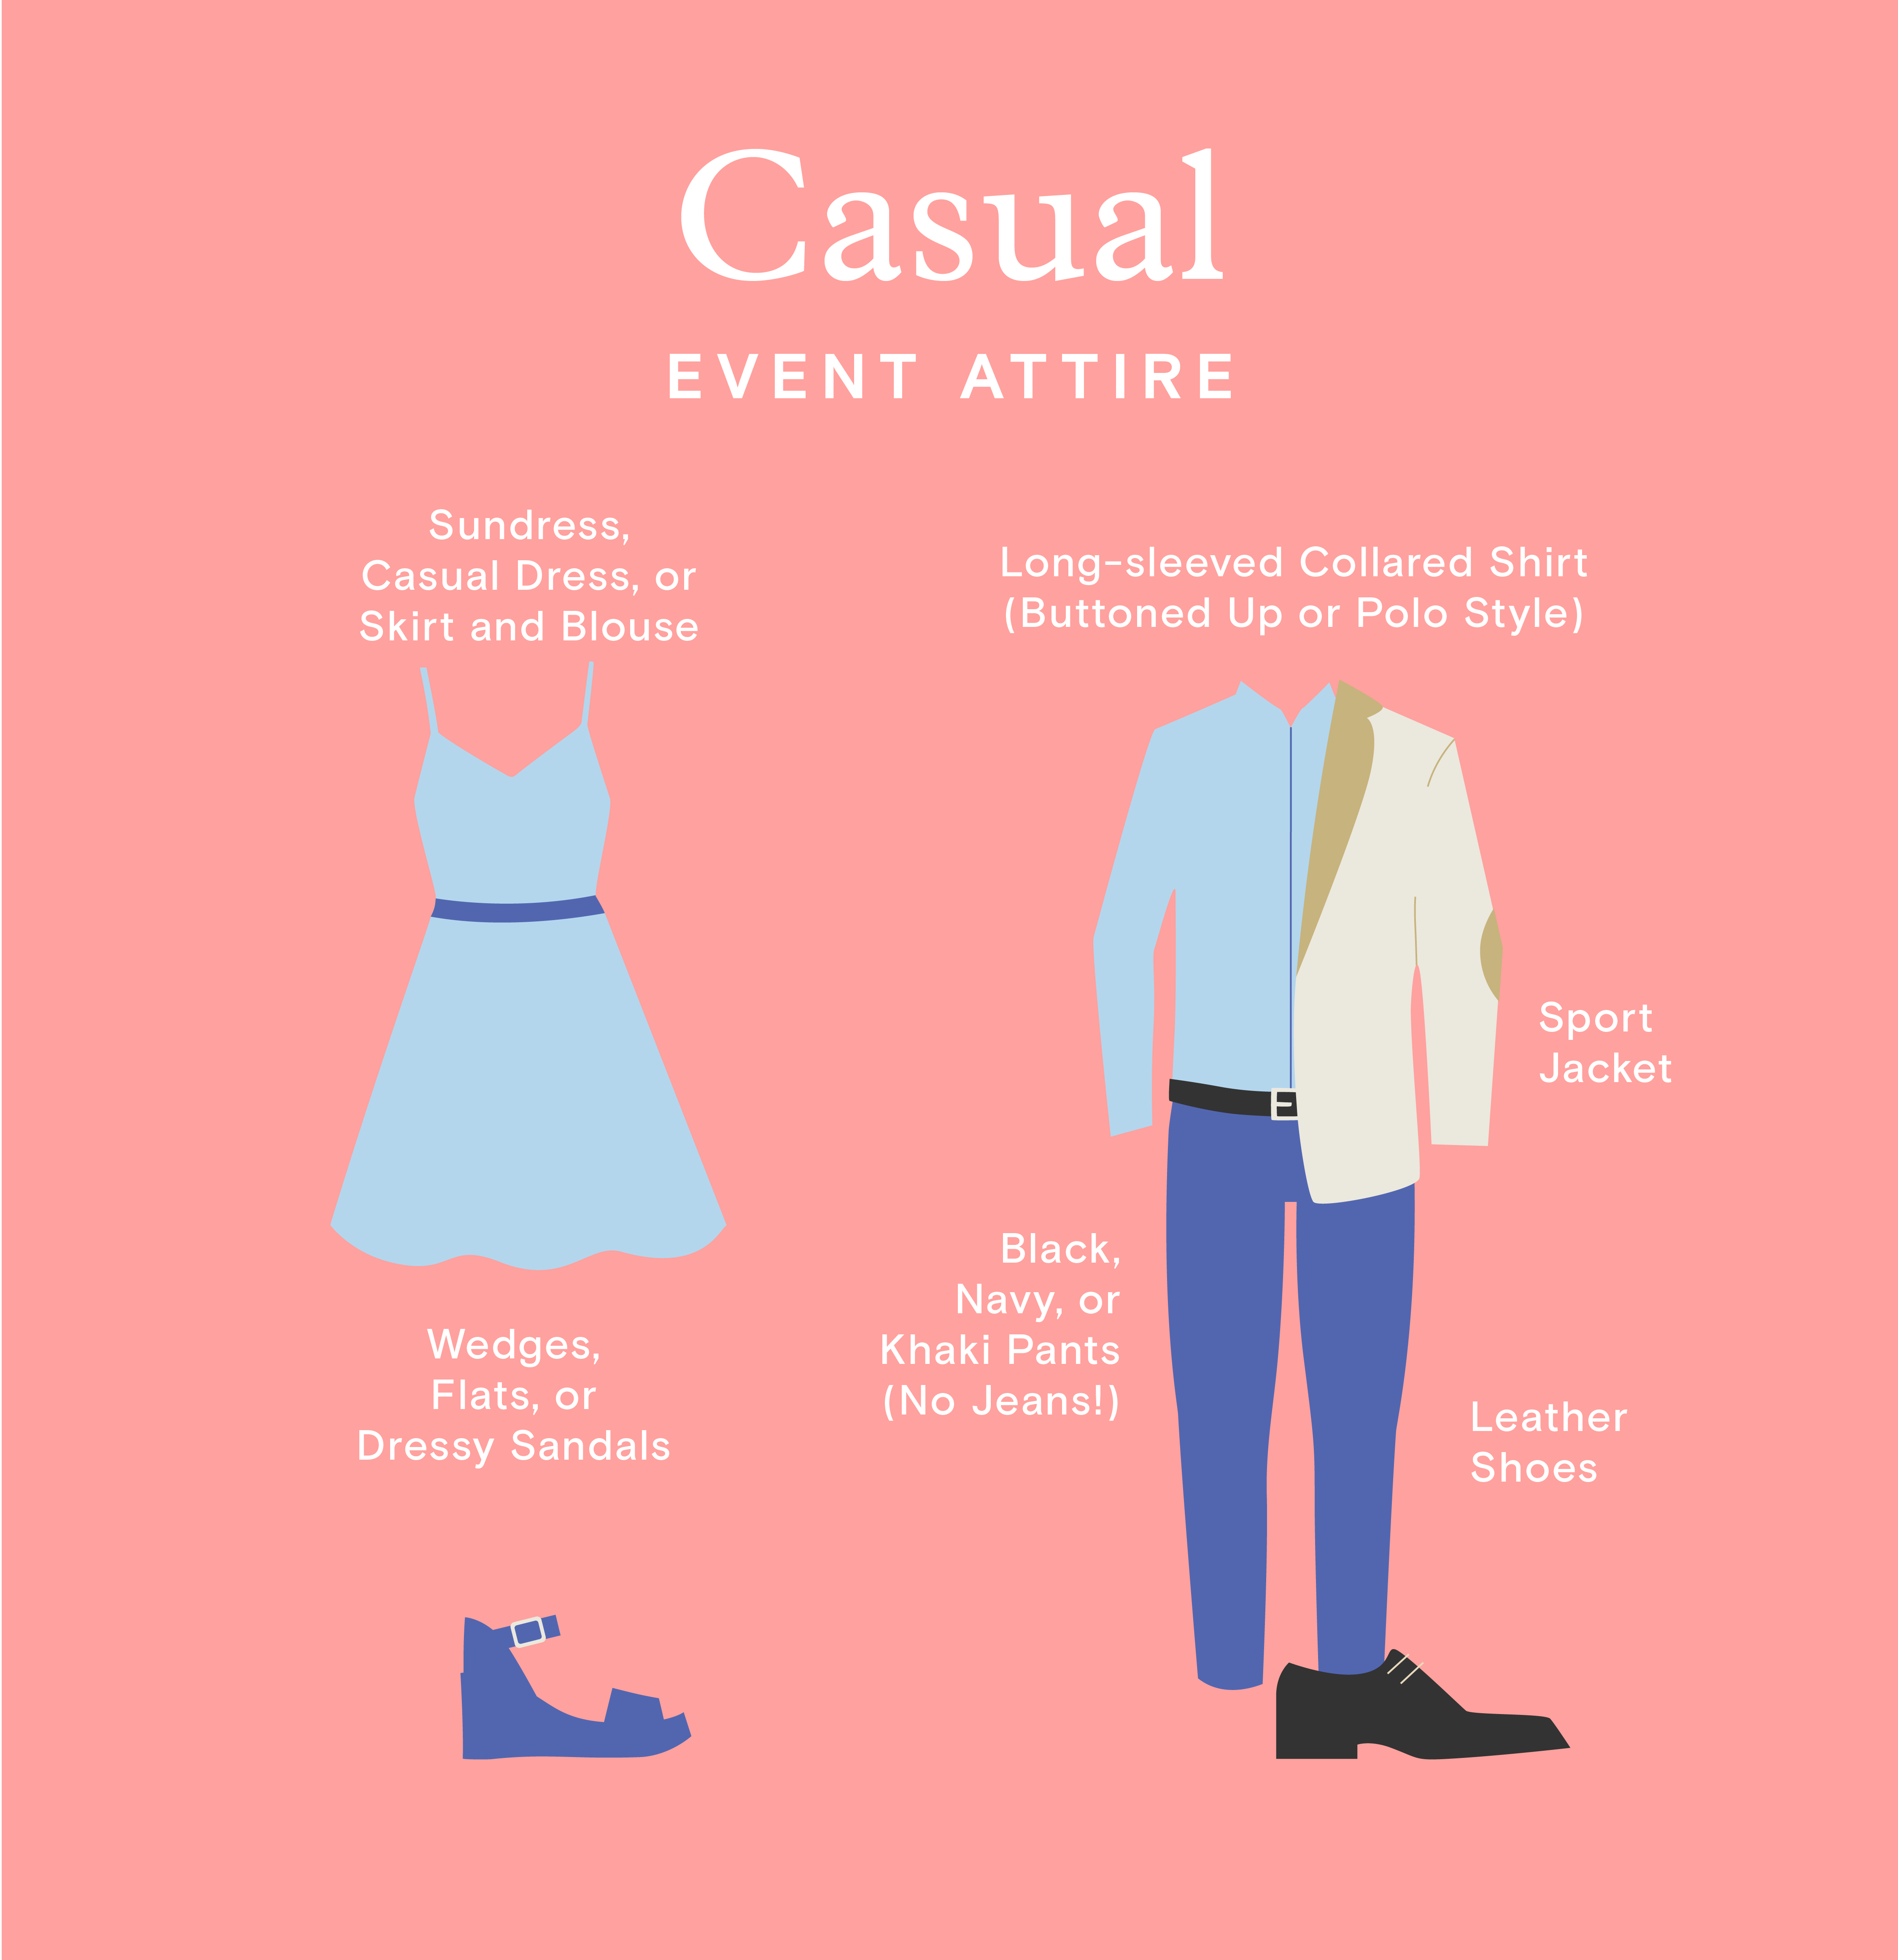 How to Dress for a Semiformal Event